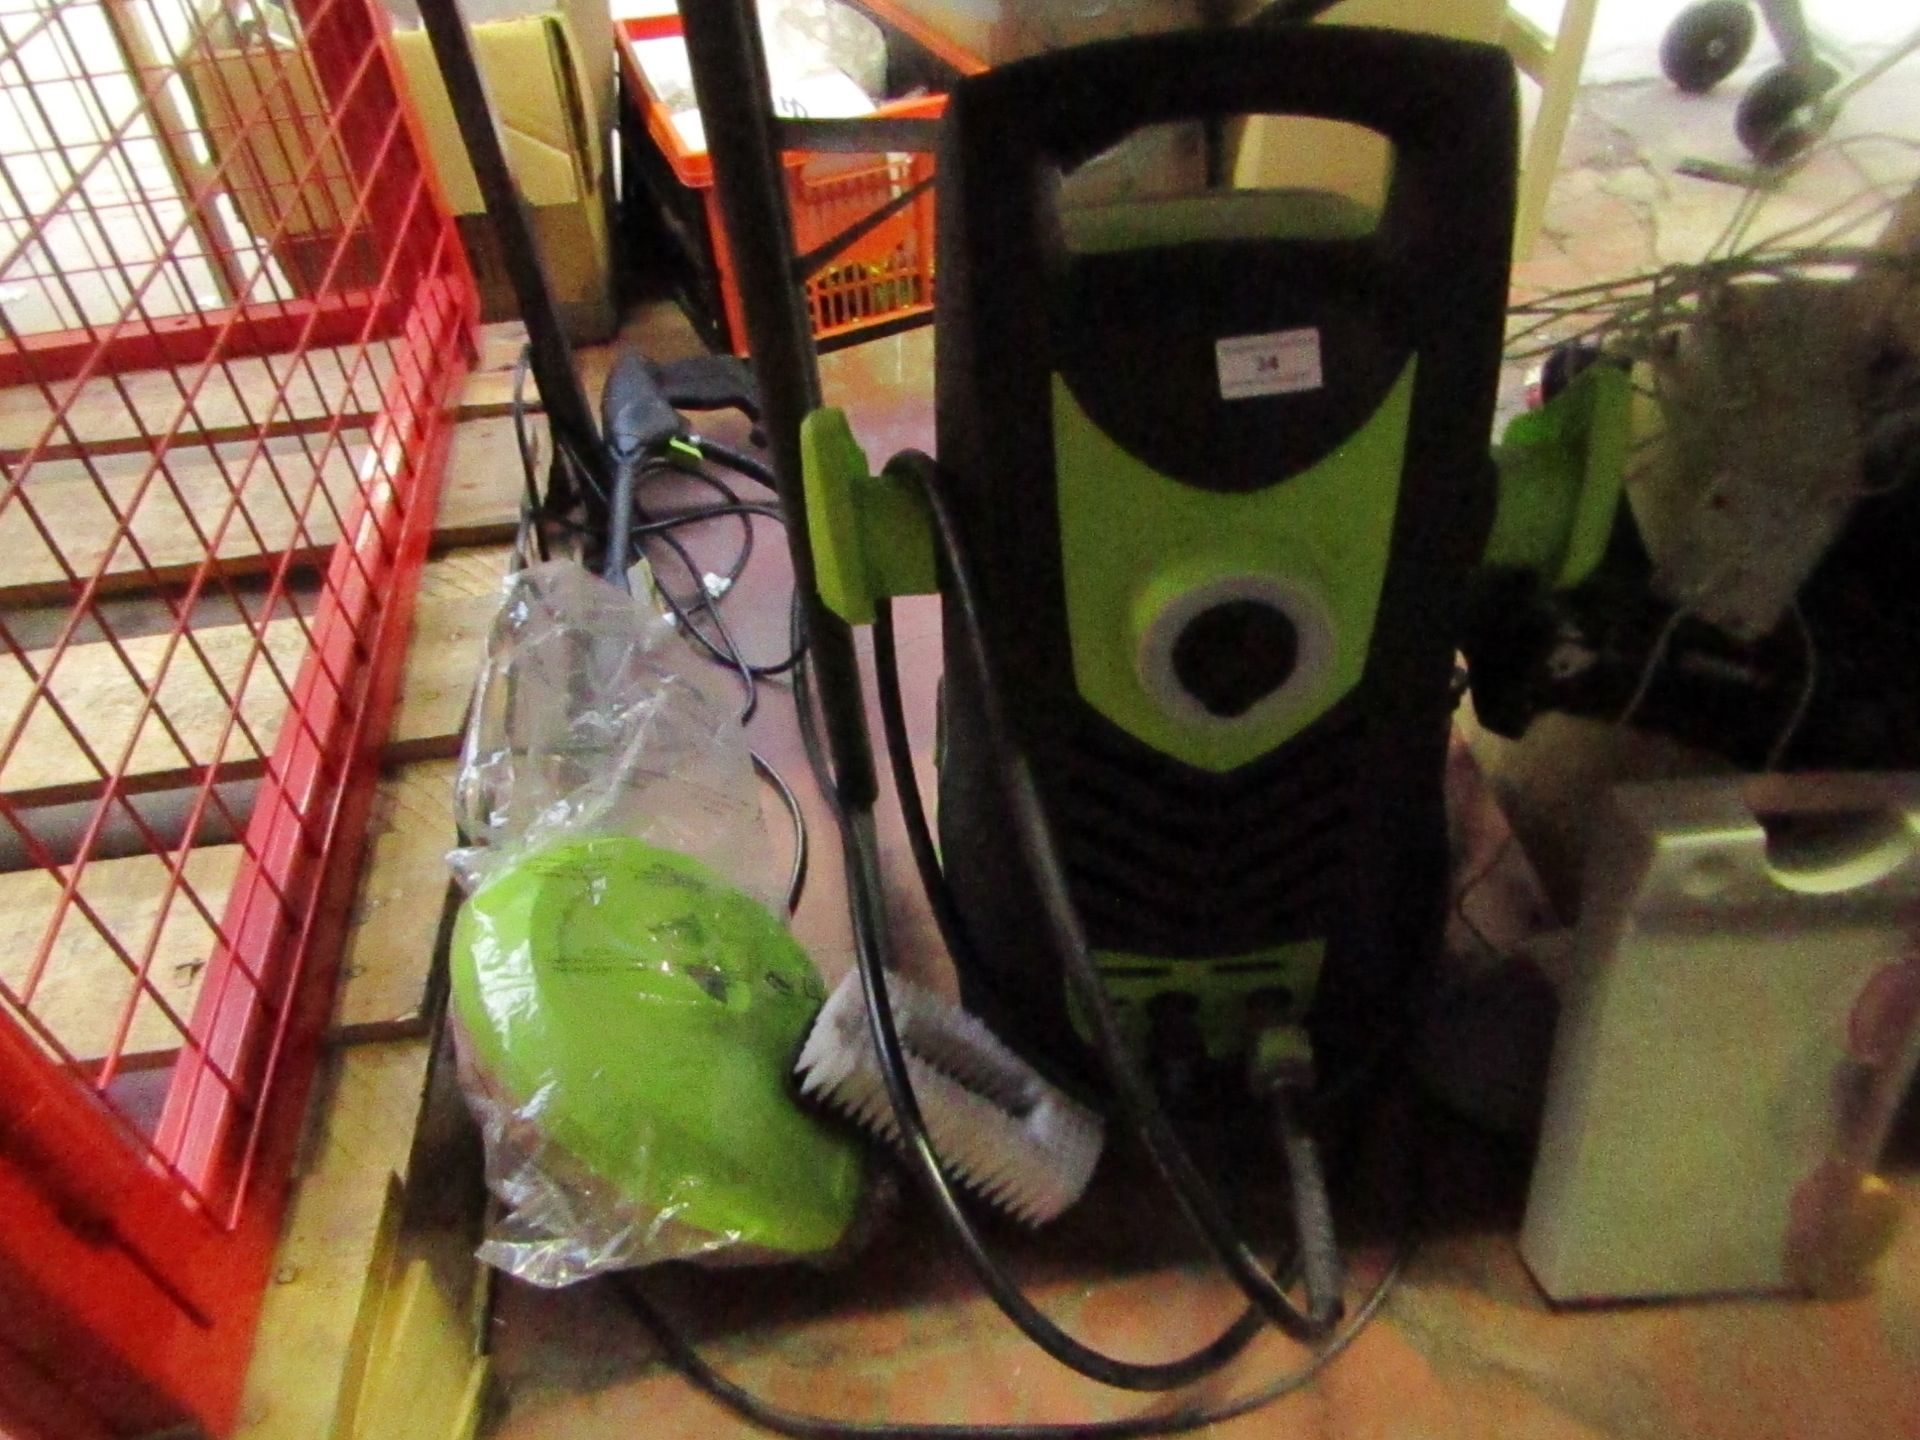 Unbranded Electric Jet Wash - With Accessories For Patio Cleaning - Untested.